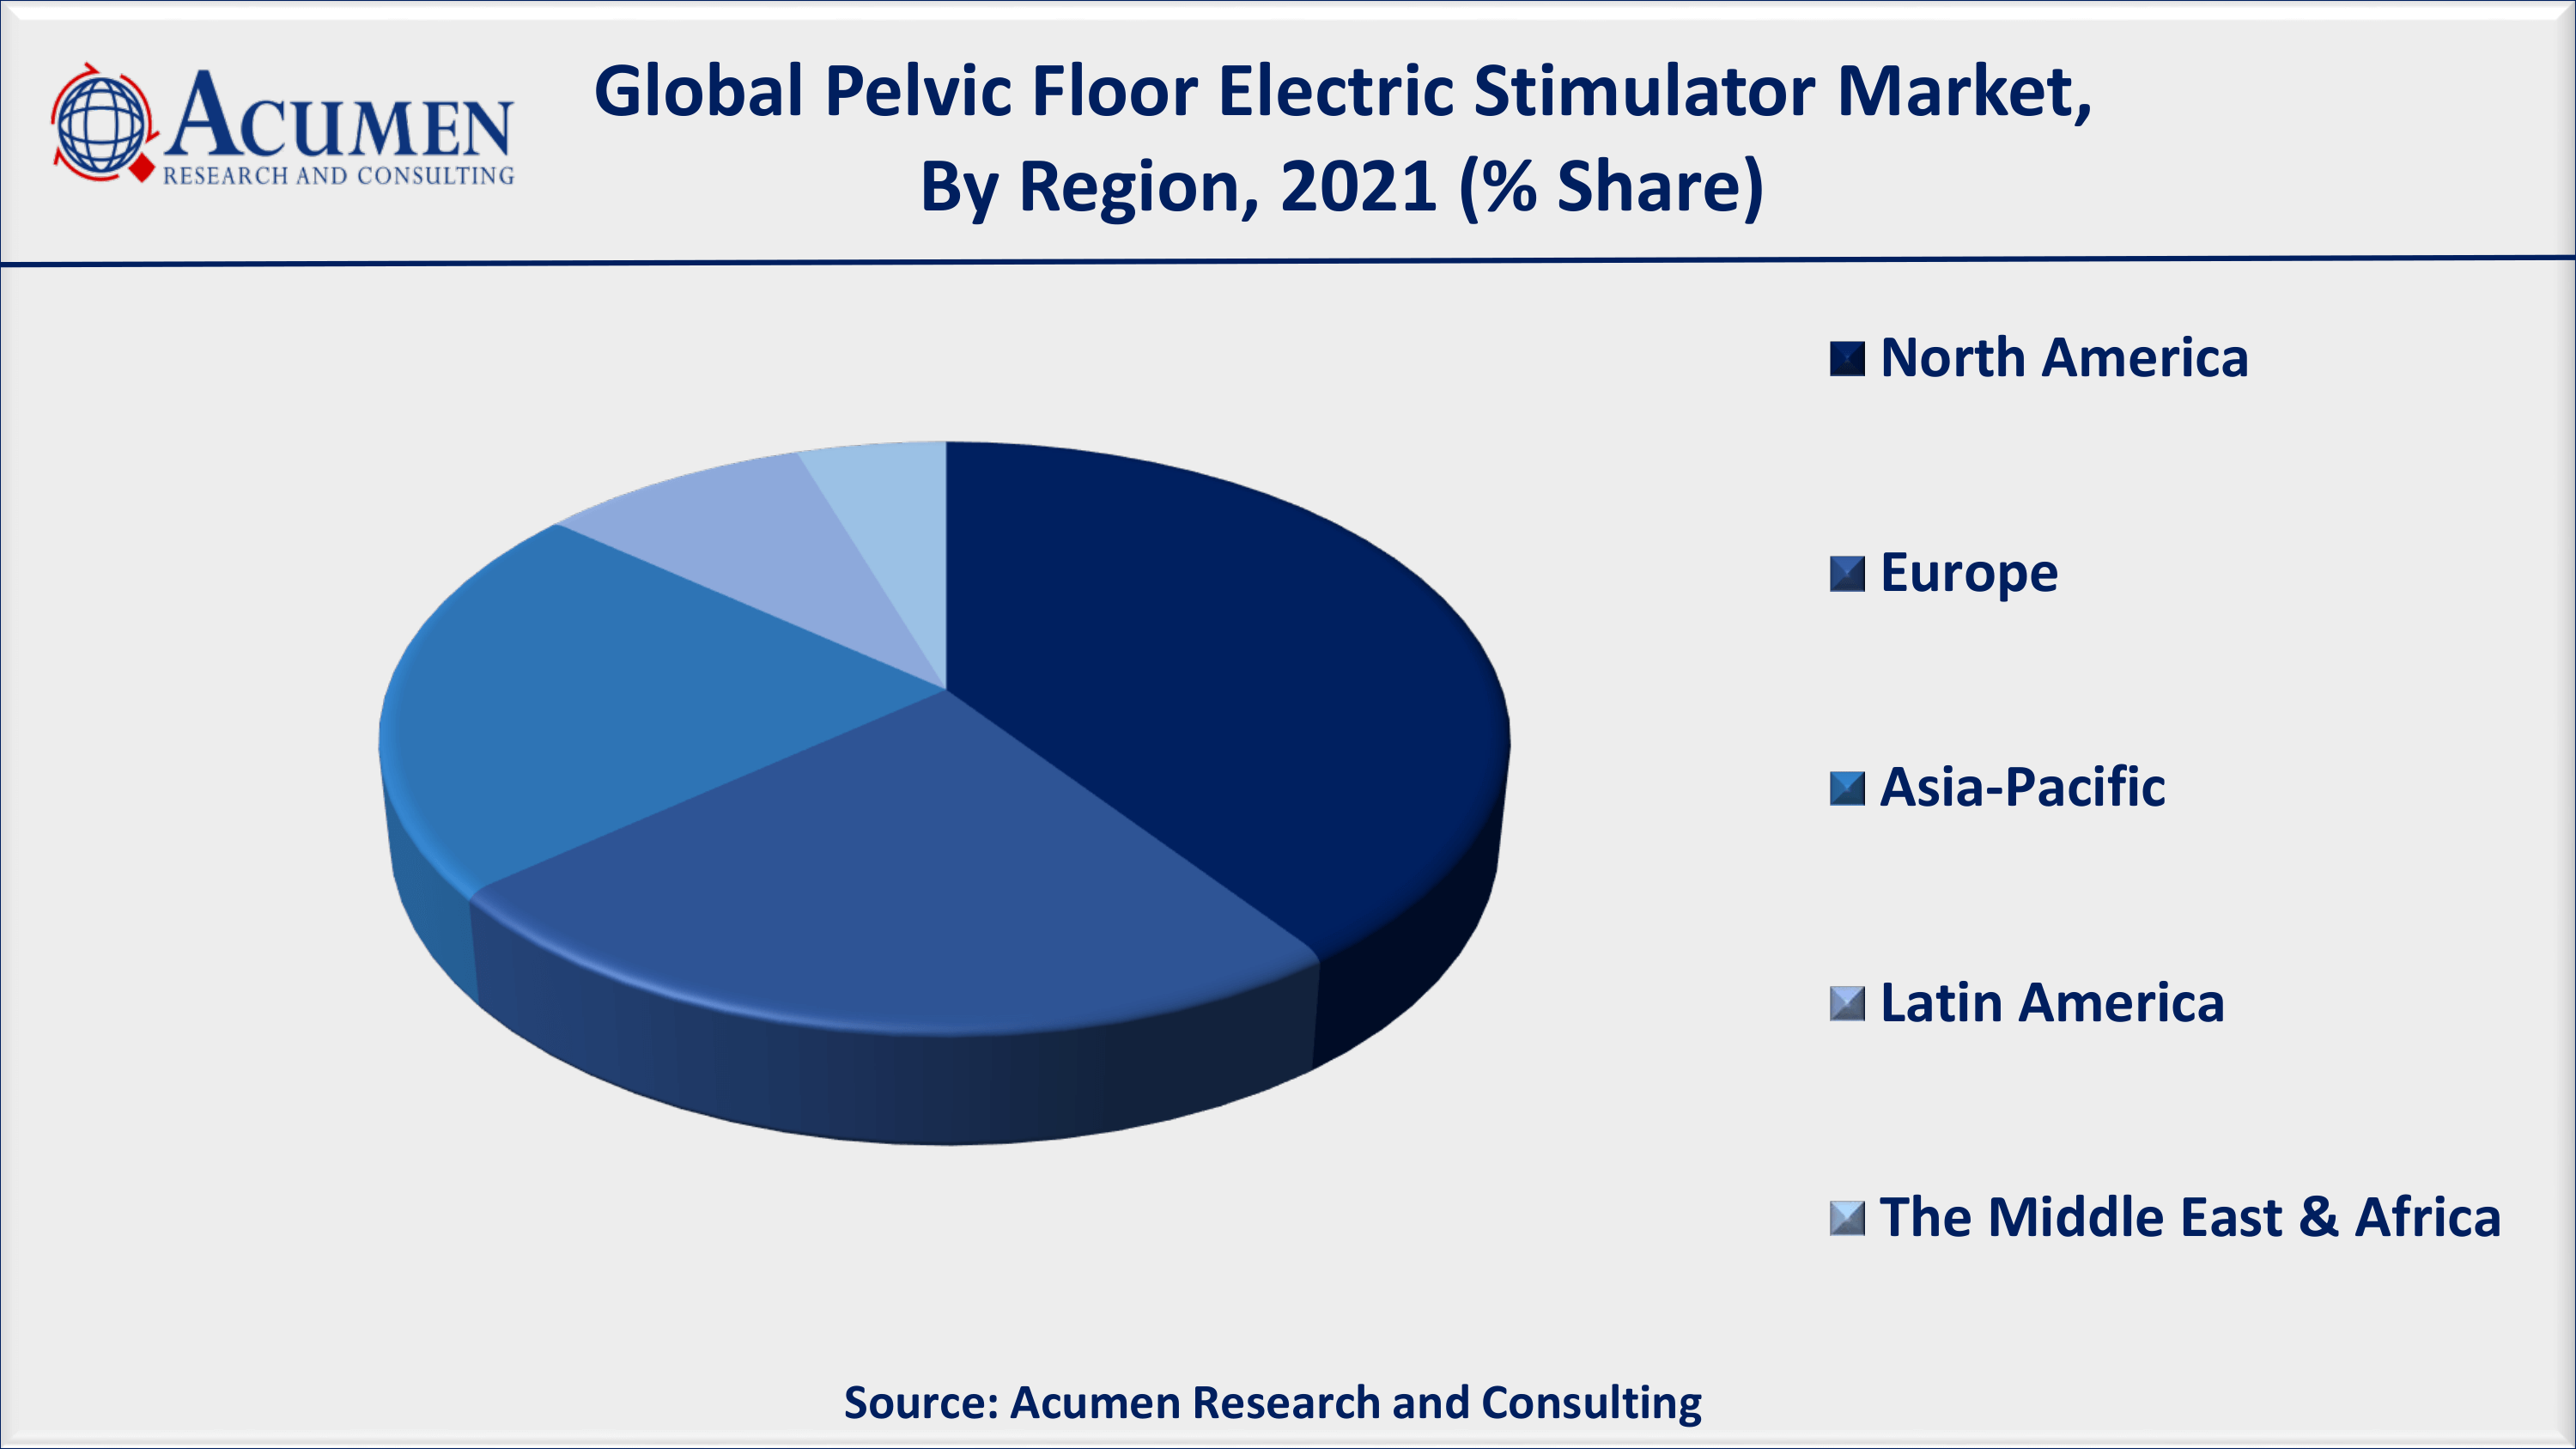 Increasing cases of urinary incontinence fuels the global pelvic floor electric stimulator market value